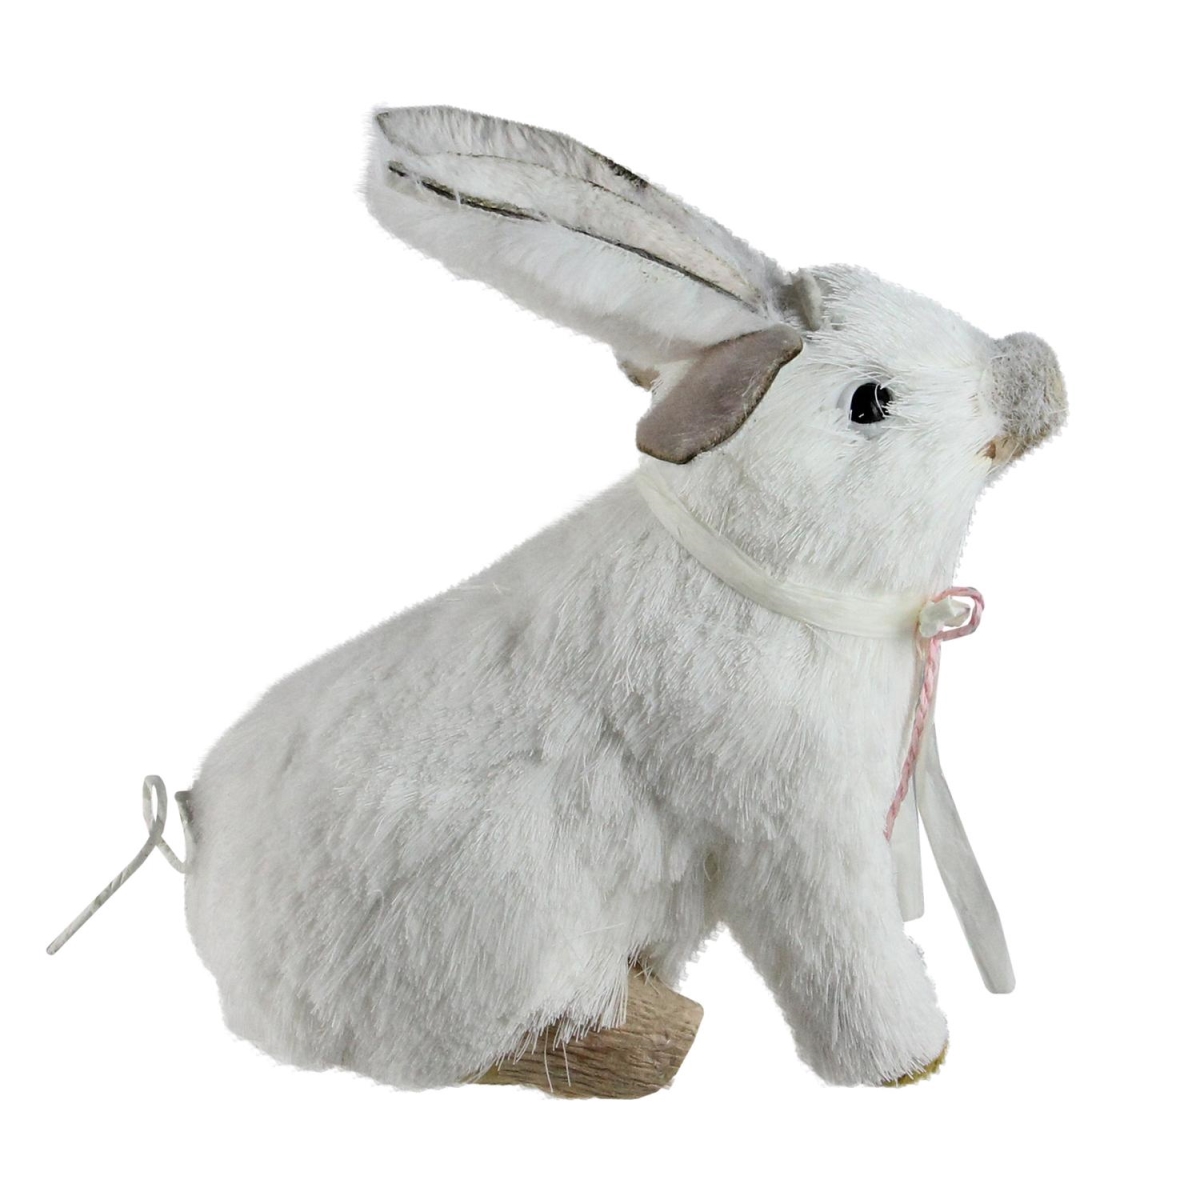 32734089 7 In. Easter White Playful Piglet With Silly Bunny Rabbit Ears Spring Figure